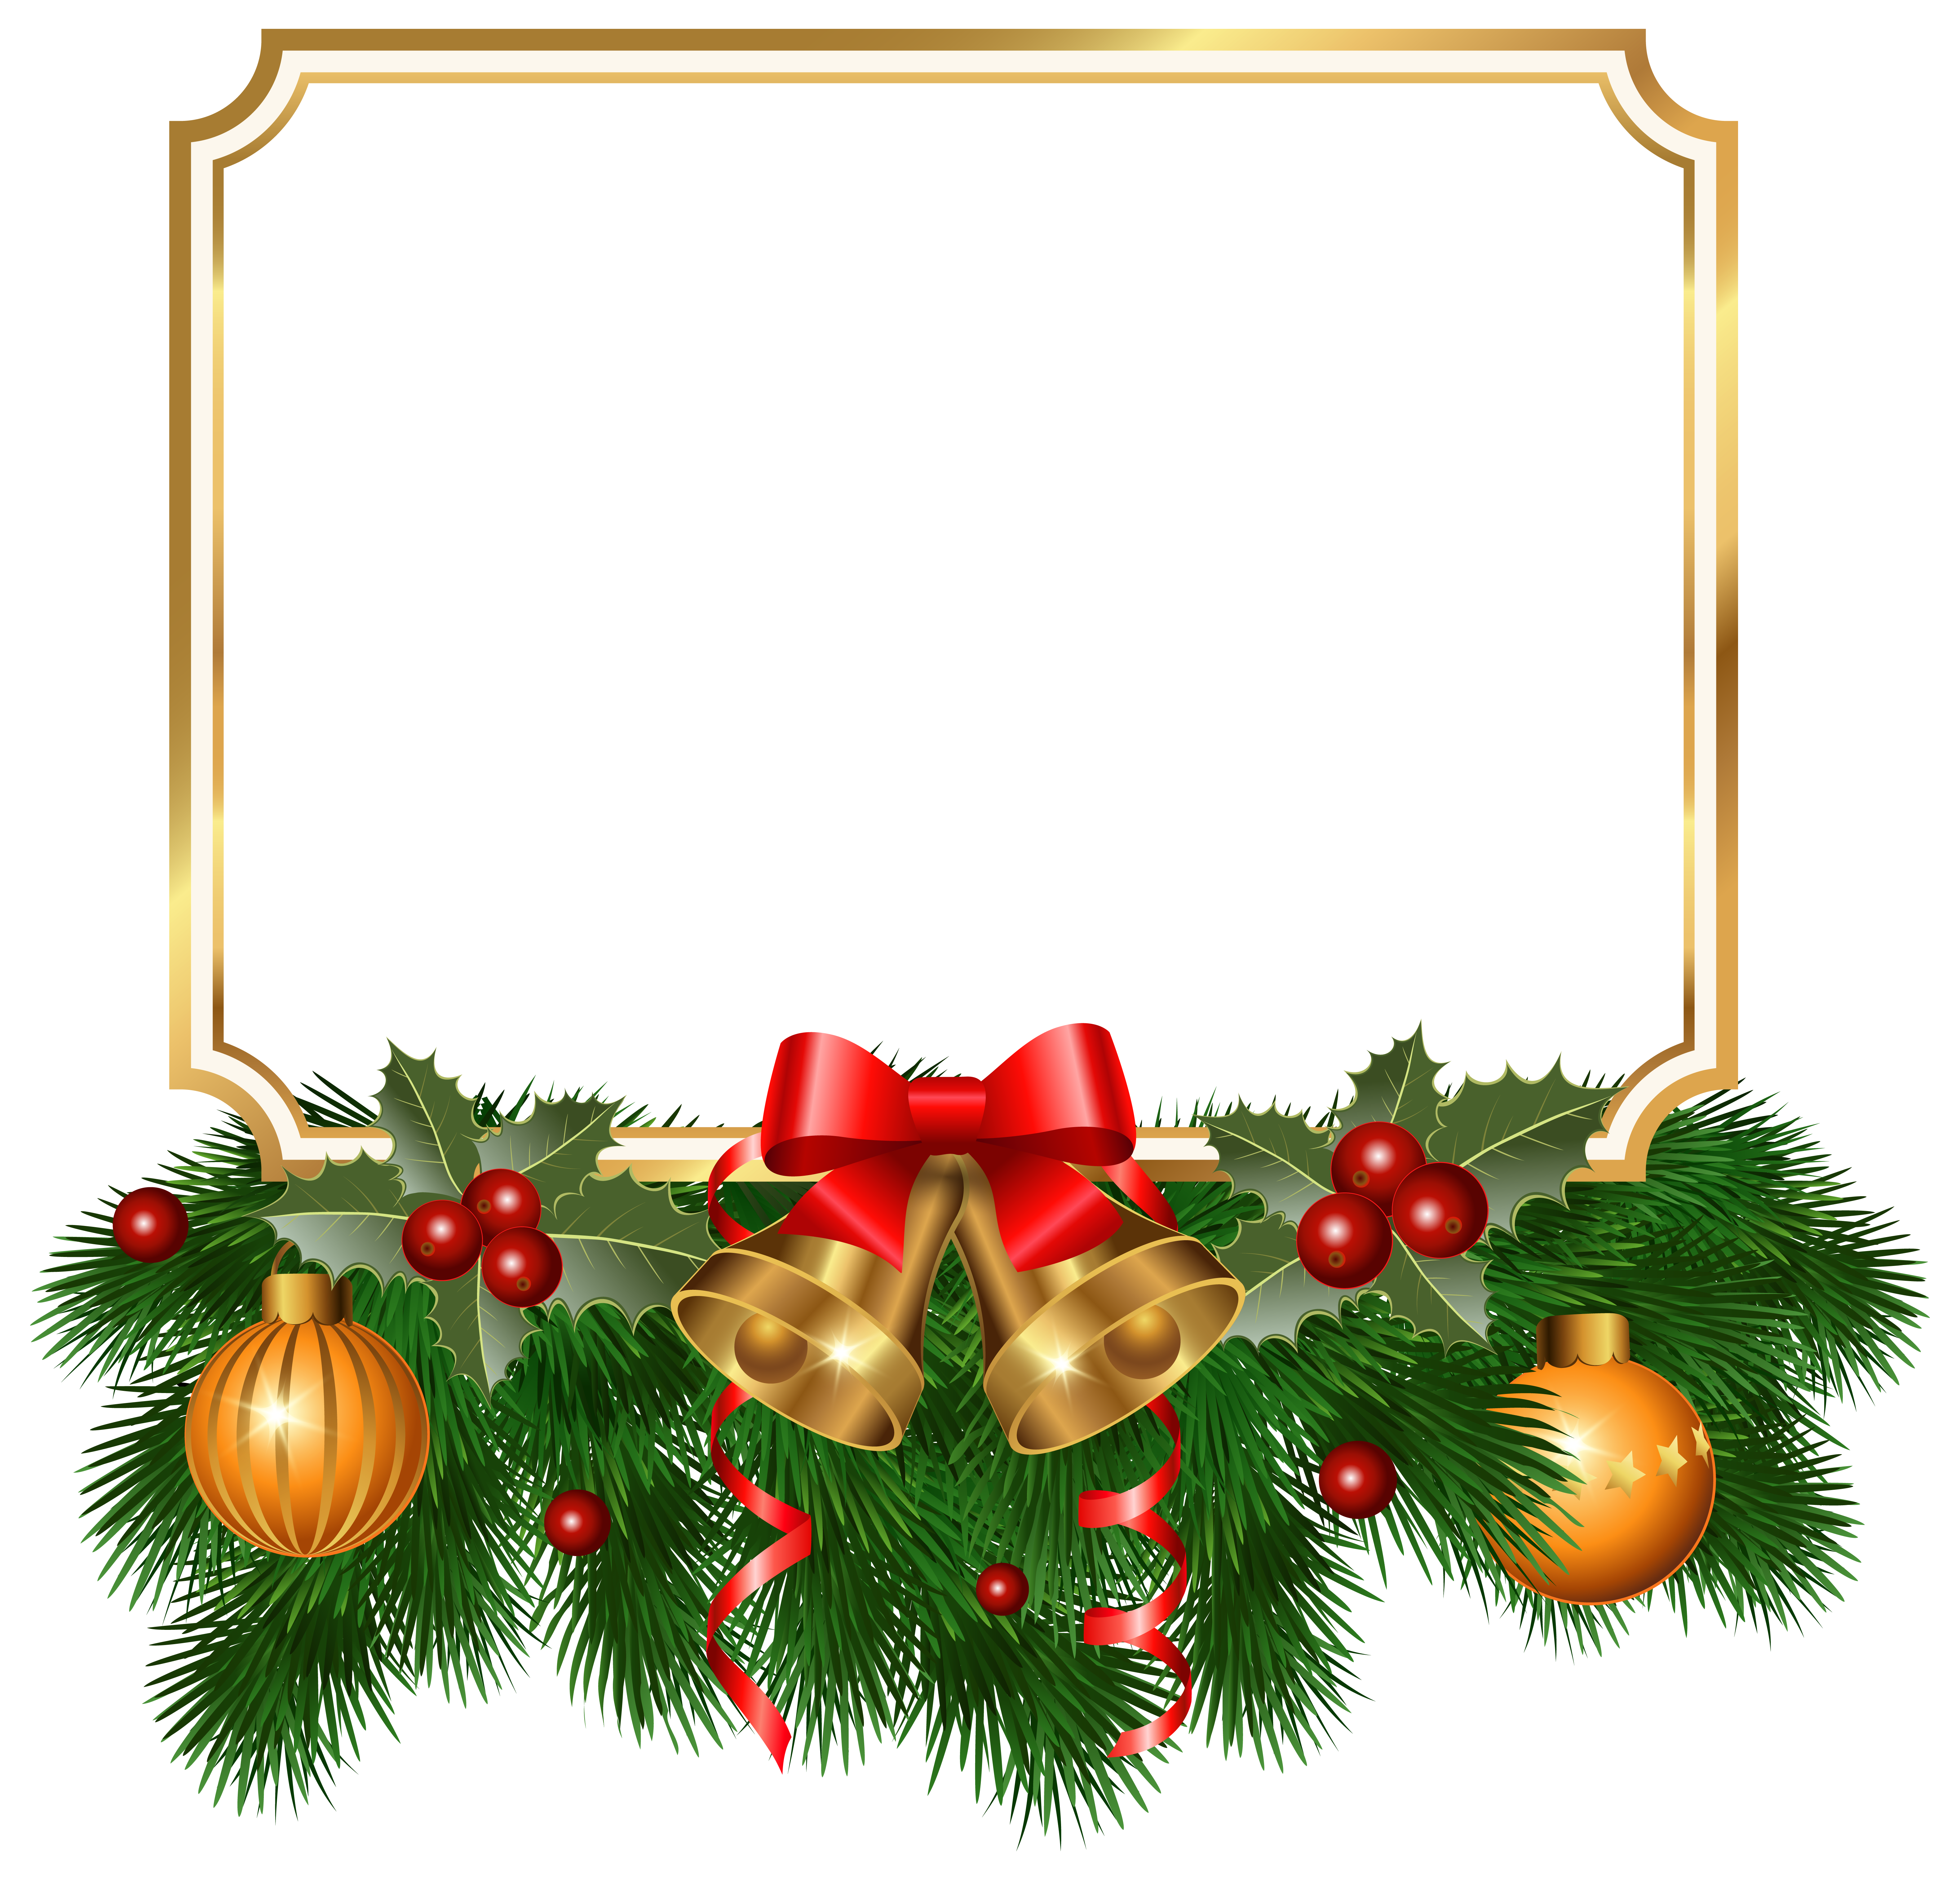 Christmas Tree Christmas Ornament Fir Christmas Golden Border Png Clipart Image Png Download 6323 6065 Free Transparent Borders And Frames Png Download Clip Art Library